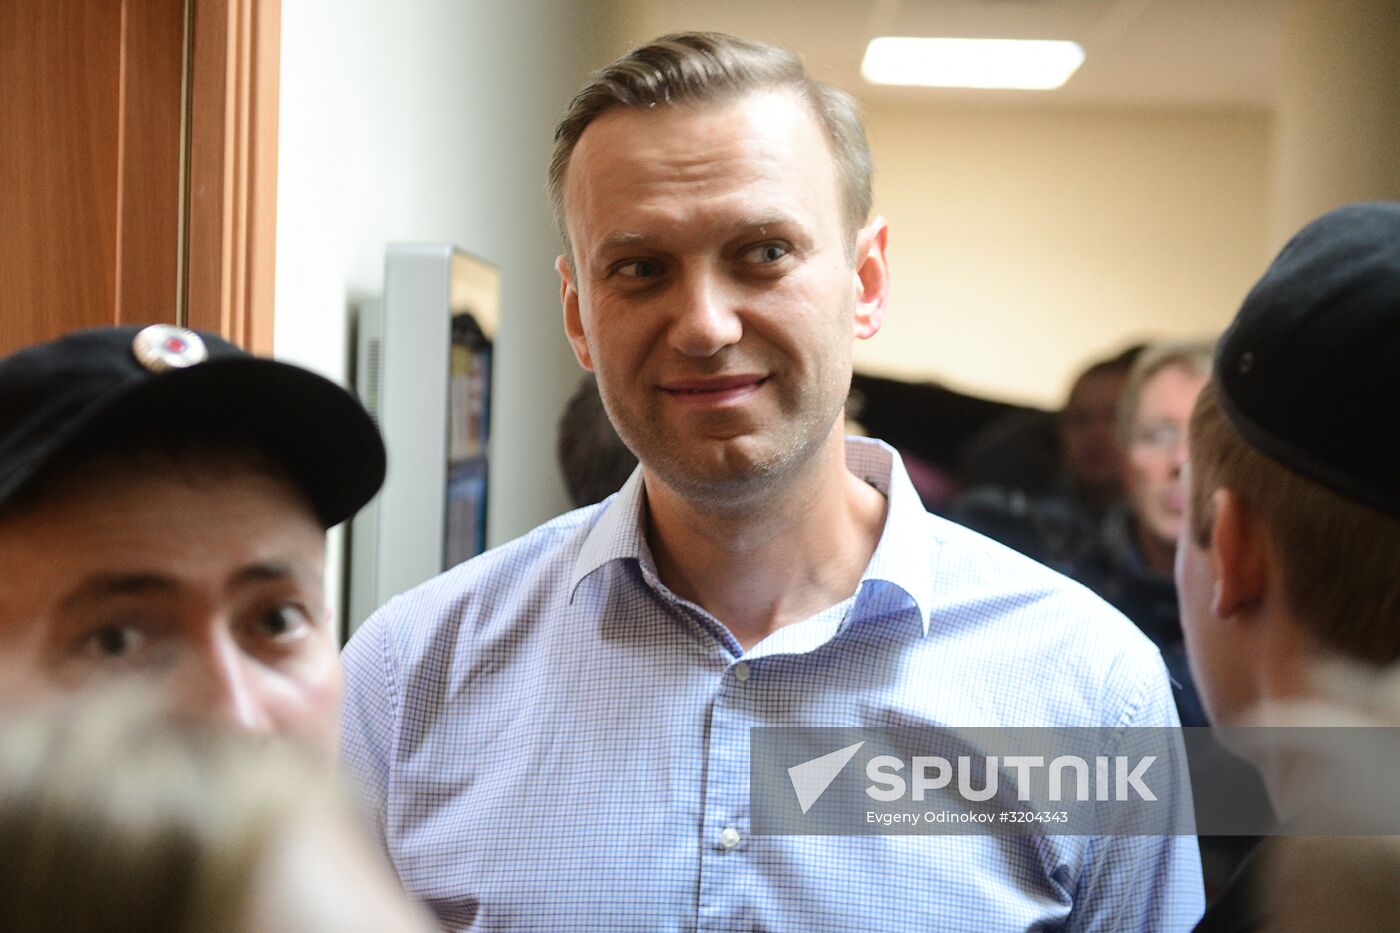 Hearing on an administrative case against Alexei Navalny in Simonovsky Court